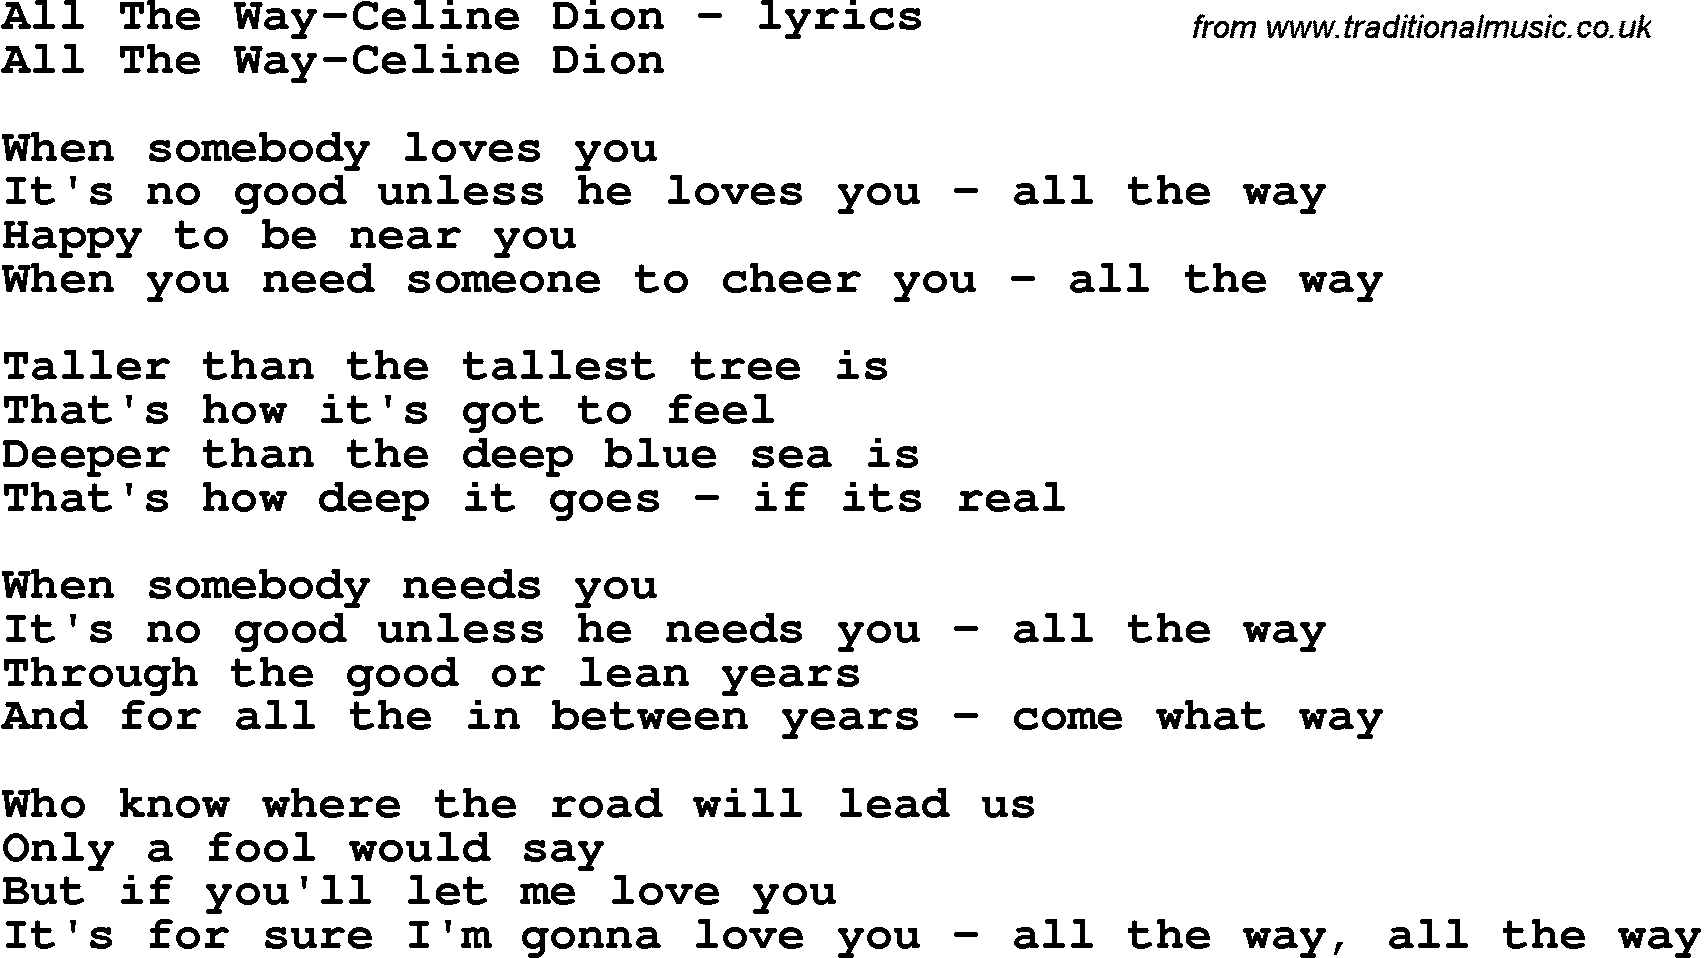 Love Song Lyrics for: All The Way-Celine Dion